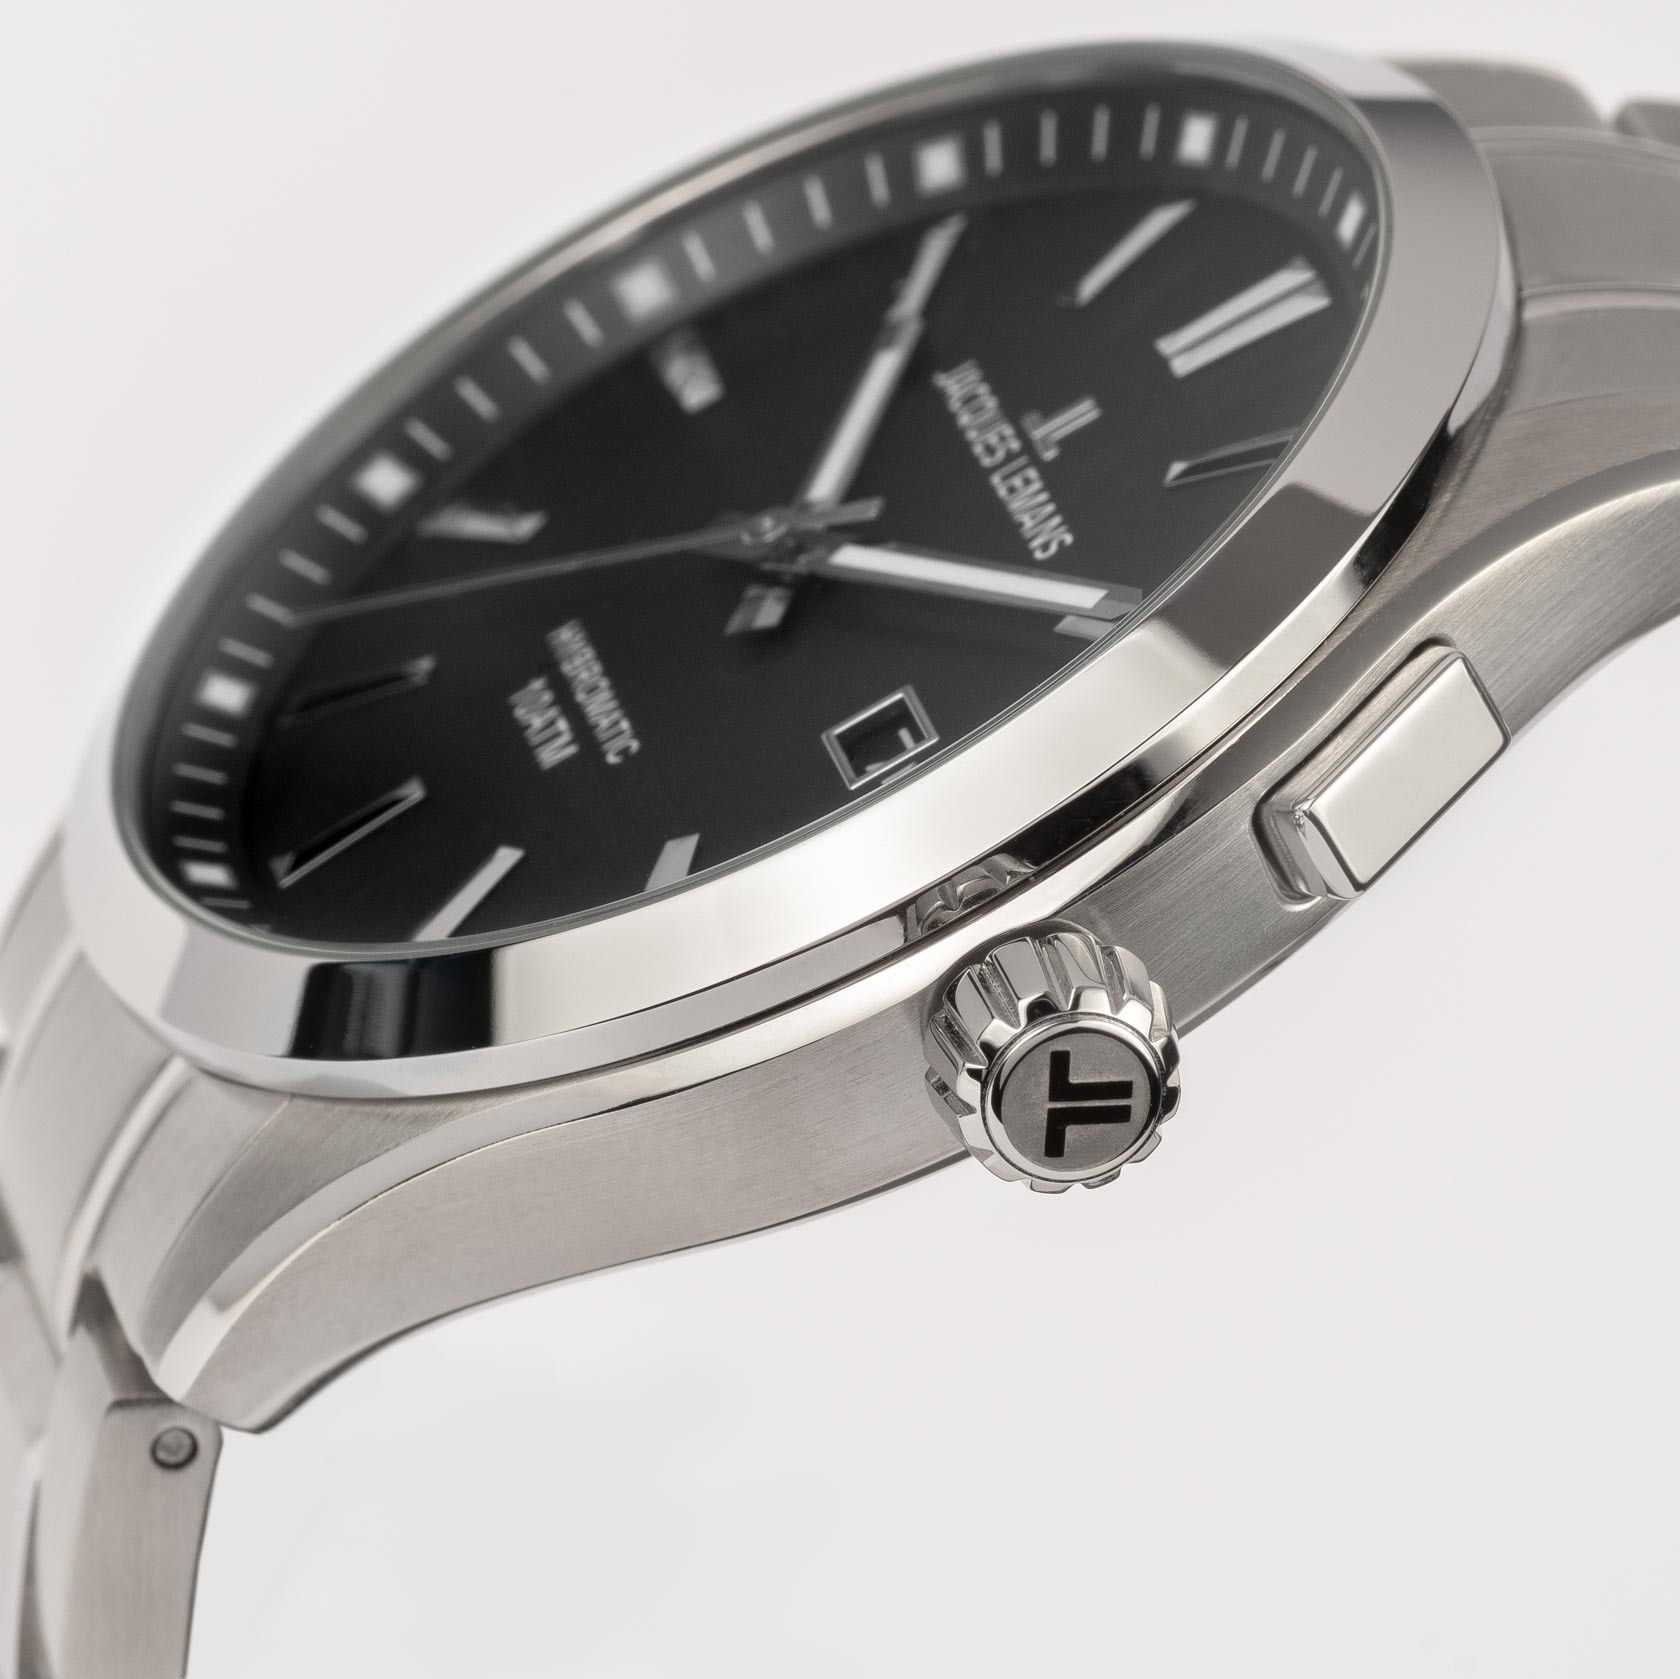 Lemans 1-2130E« online UNIVERSAL Jacques bei »Hybromatic, Kineticuhr